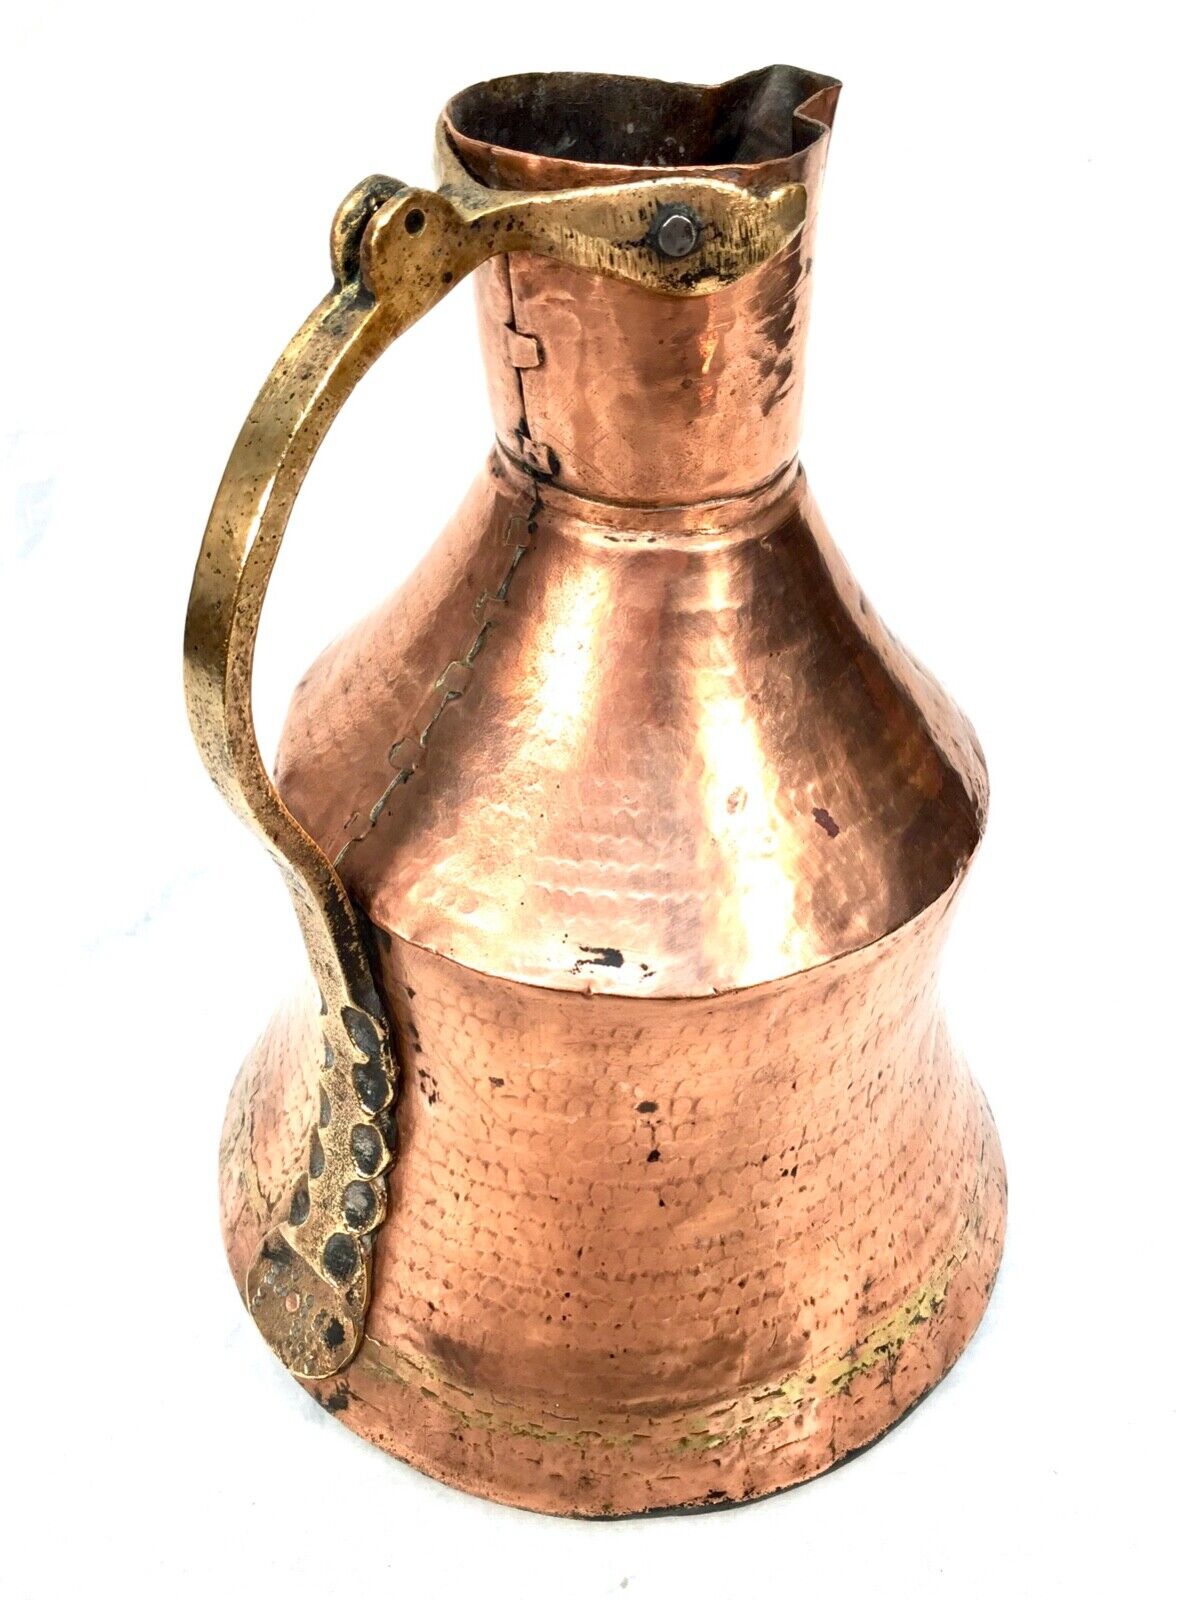 Antique Arts And Crafts Large Copper & Brass Water Jug / Pitcher / c.1900